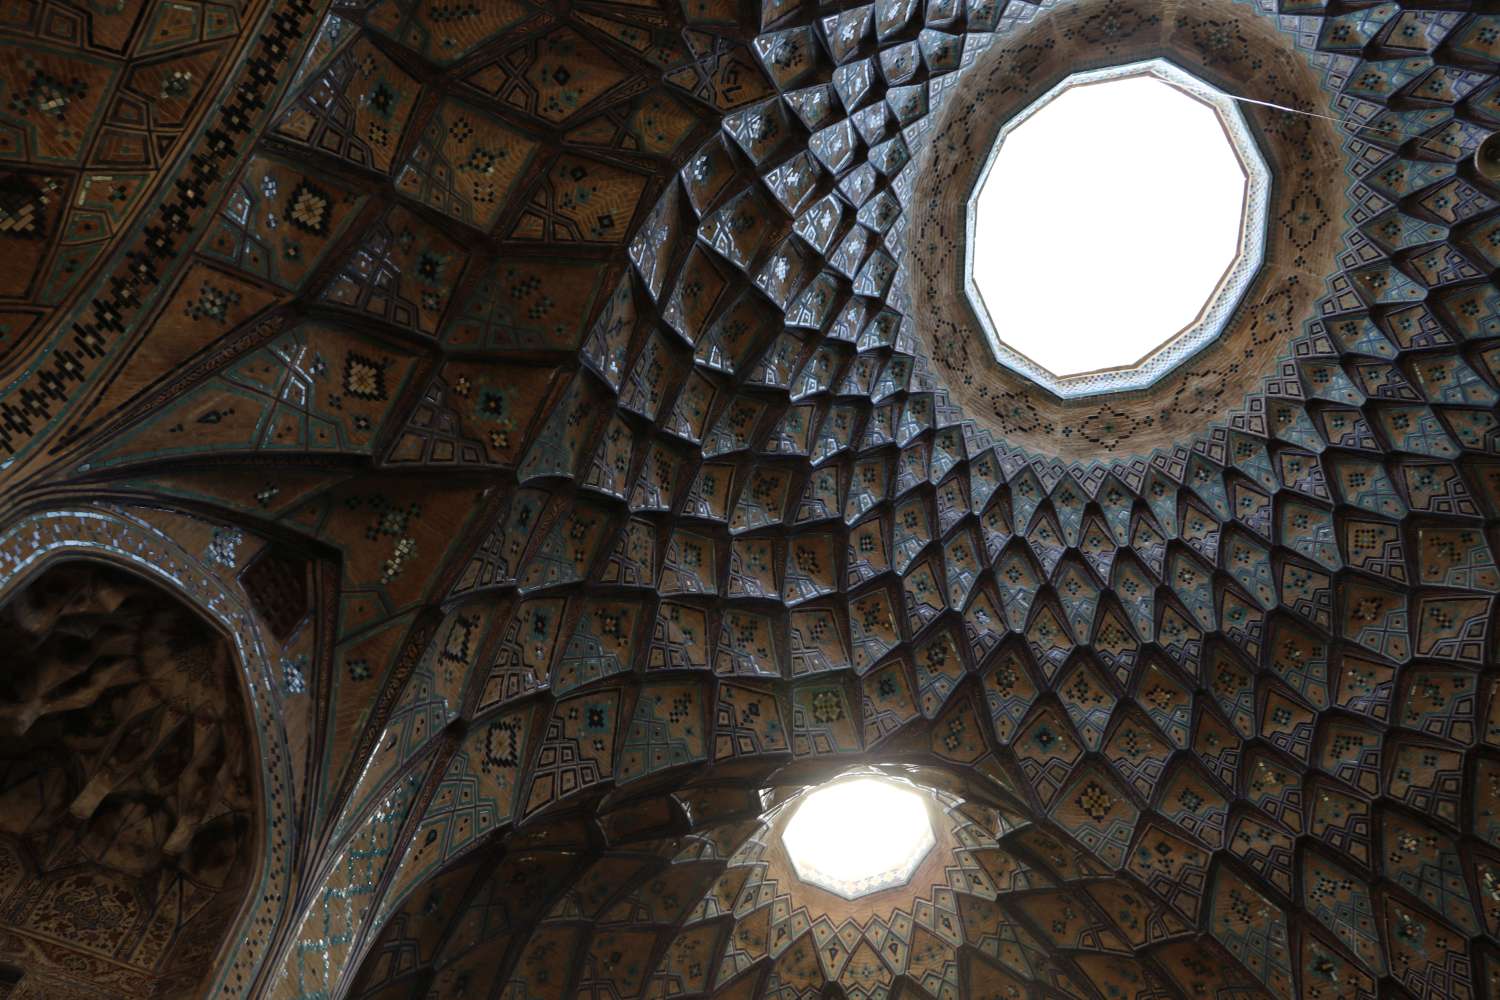 Ceiling over central space in the Timchah of Amin al-Dawlah.